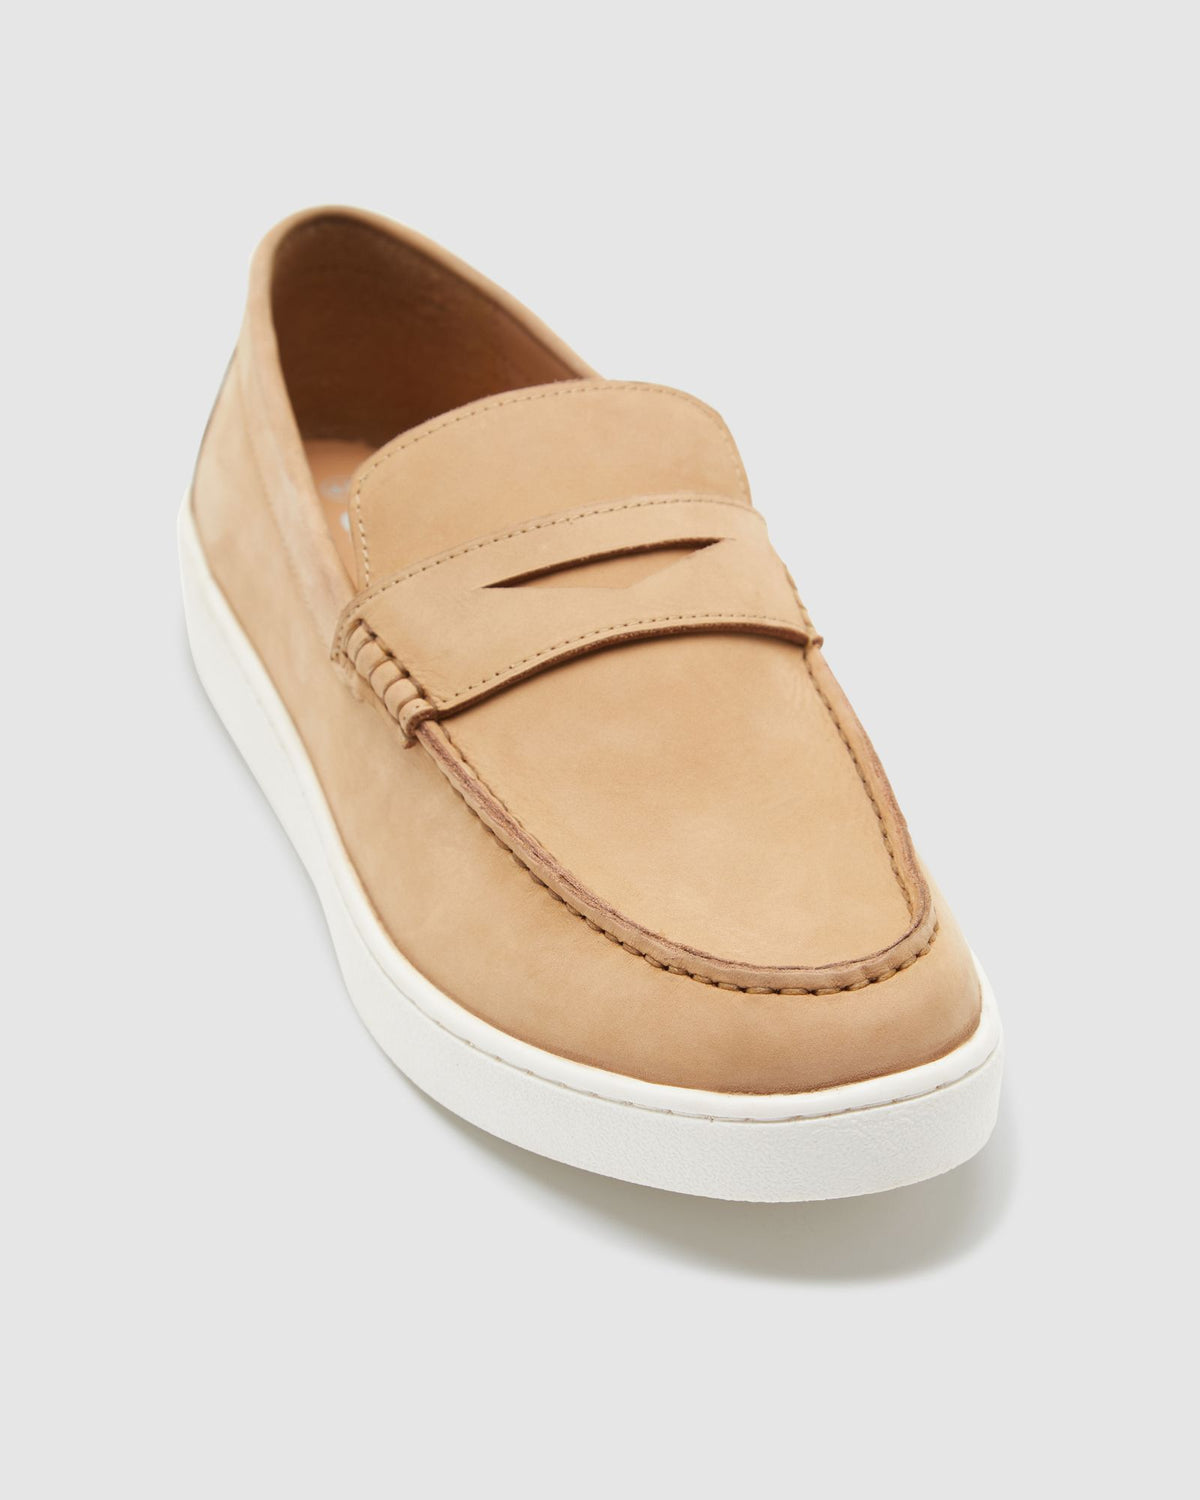 HAMPTON LEATHER LOAFER MENS SHOES